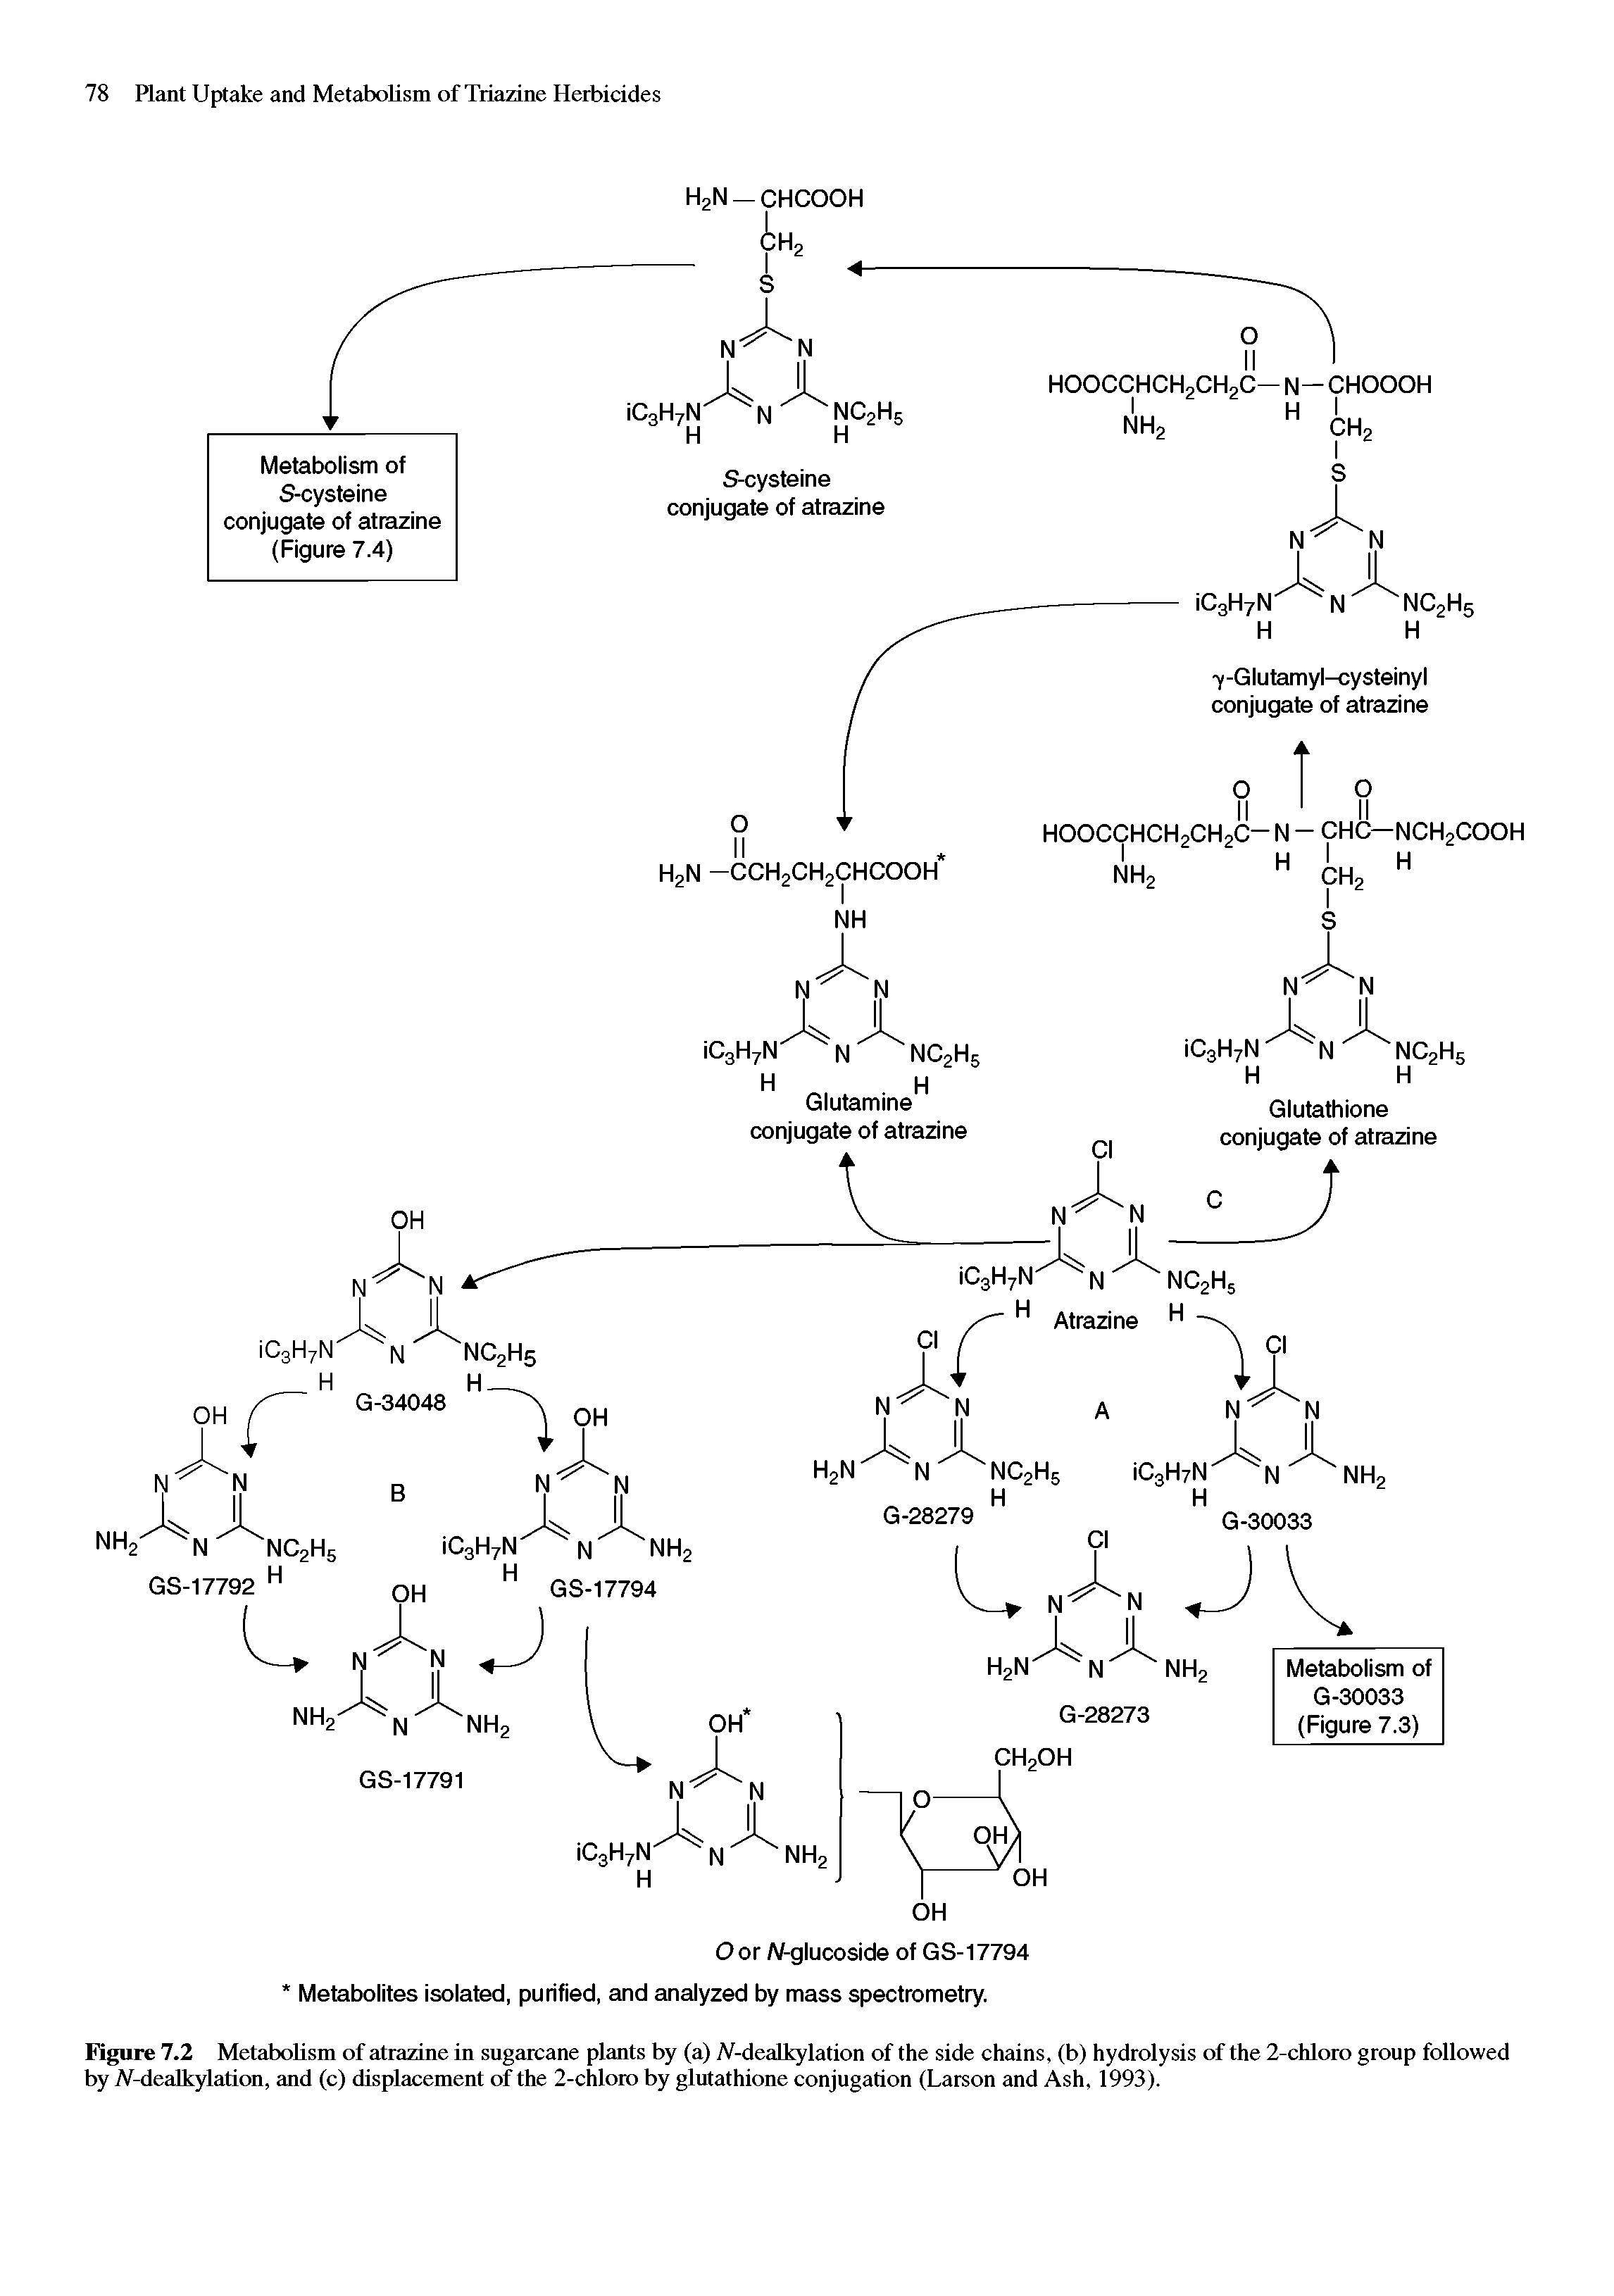 Figure 7.2 Metabolism of atrazine in sugarcane plants by (a) ALdcal kylation of the side chains, (b) hydrolysis of the 2-chloro group followed by JV-dealkylation, and (c) displacement of the 2-chloro by glutathione conjugation (Larson and Ash, 1993).